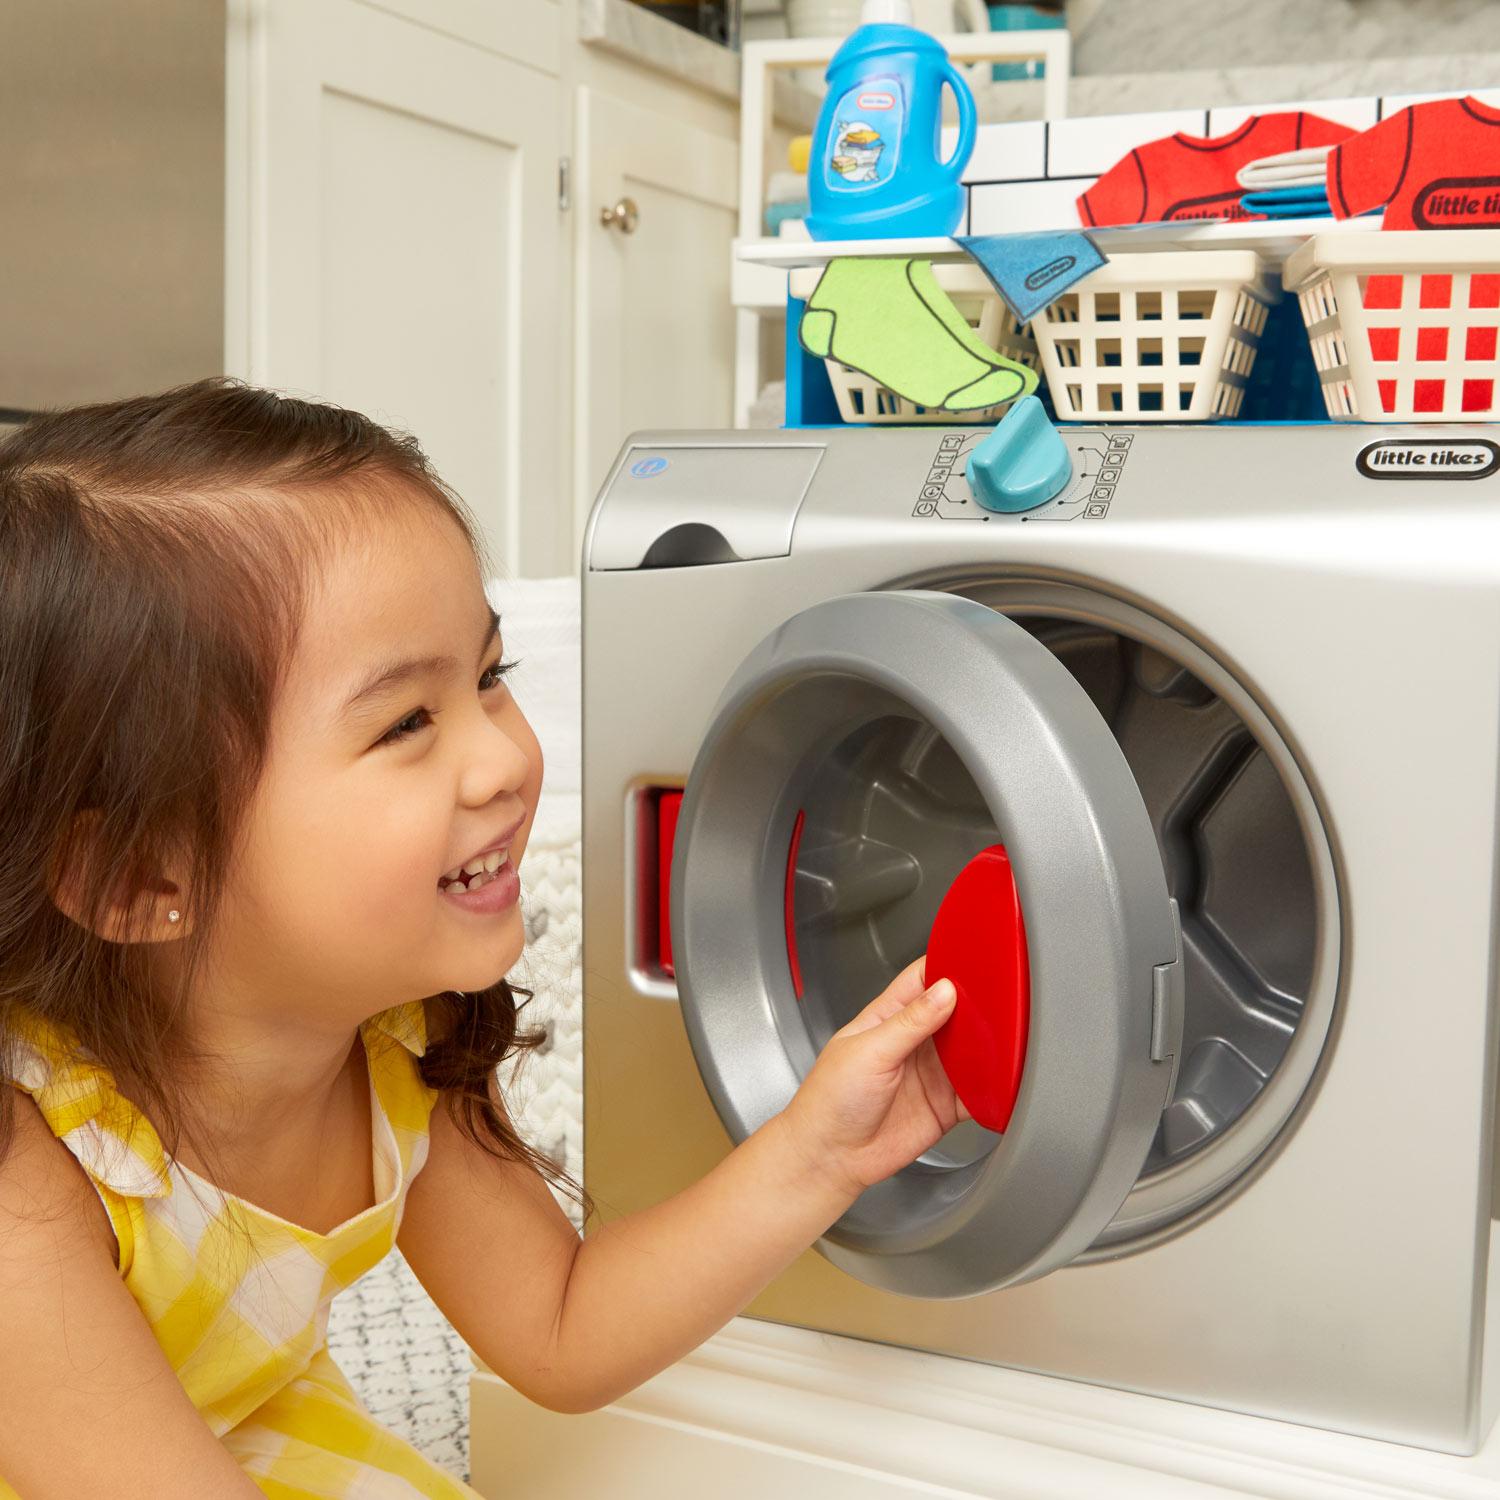 Little Tikes First Washer Dryer | Toy Washer Dryer Set For ...